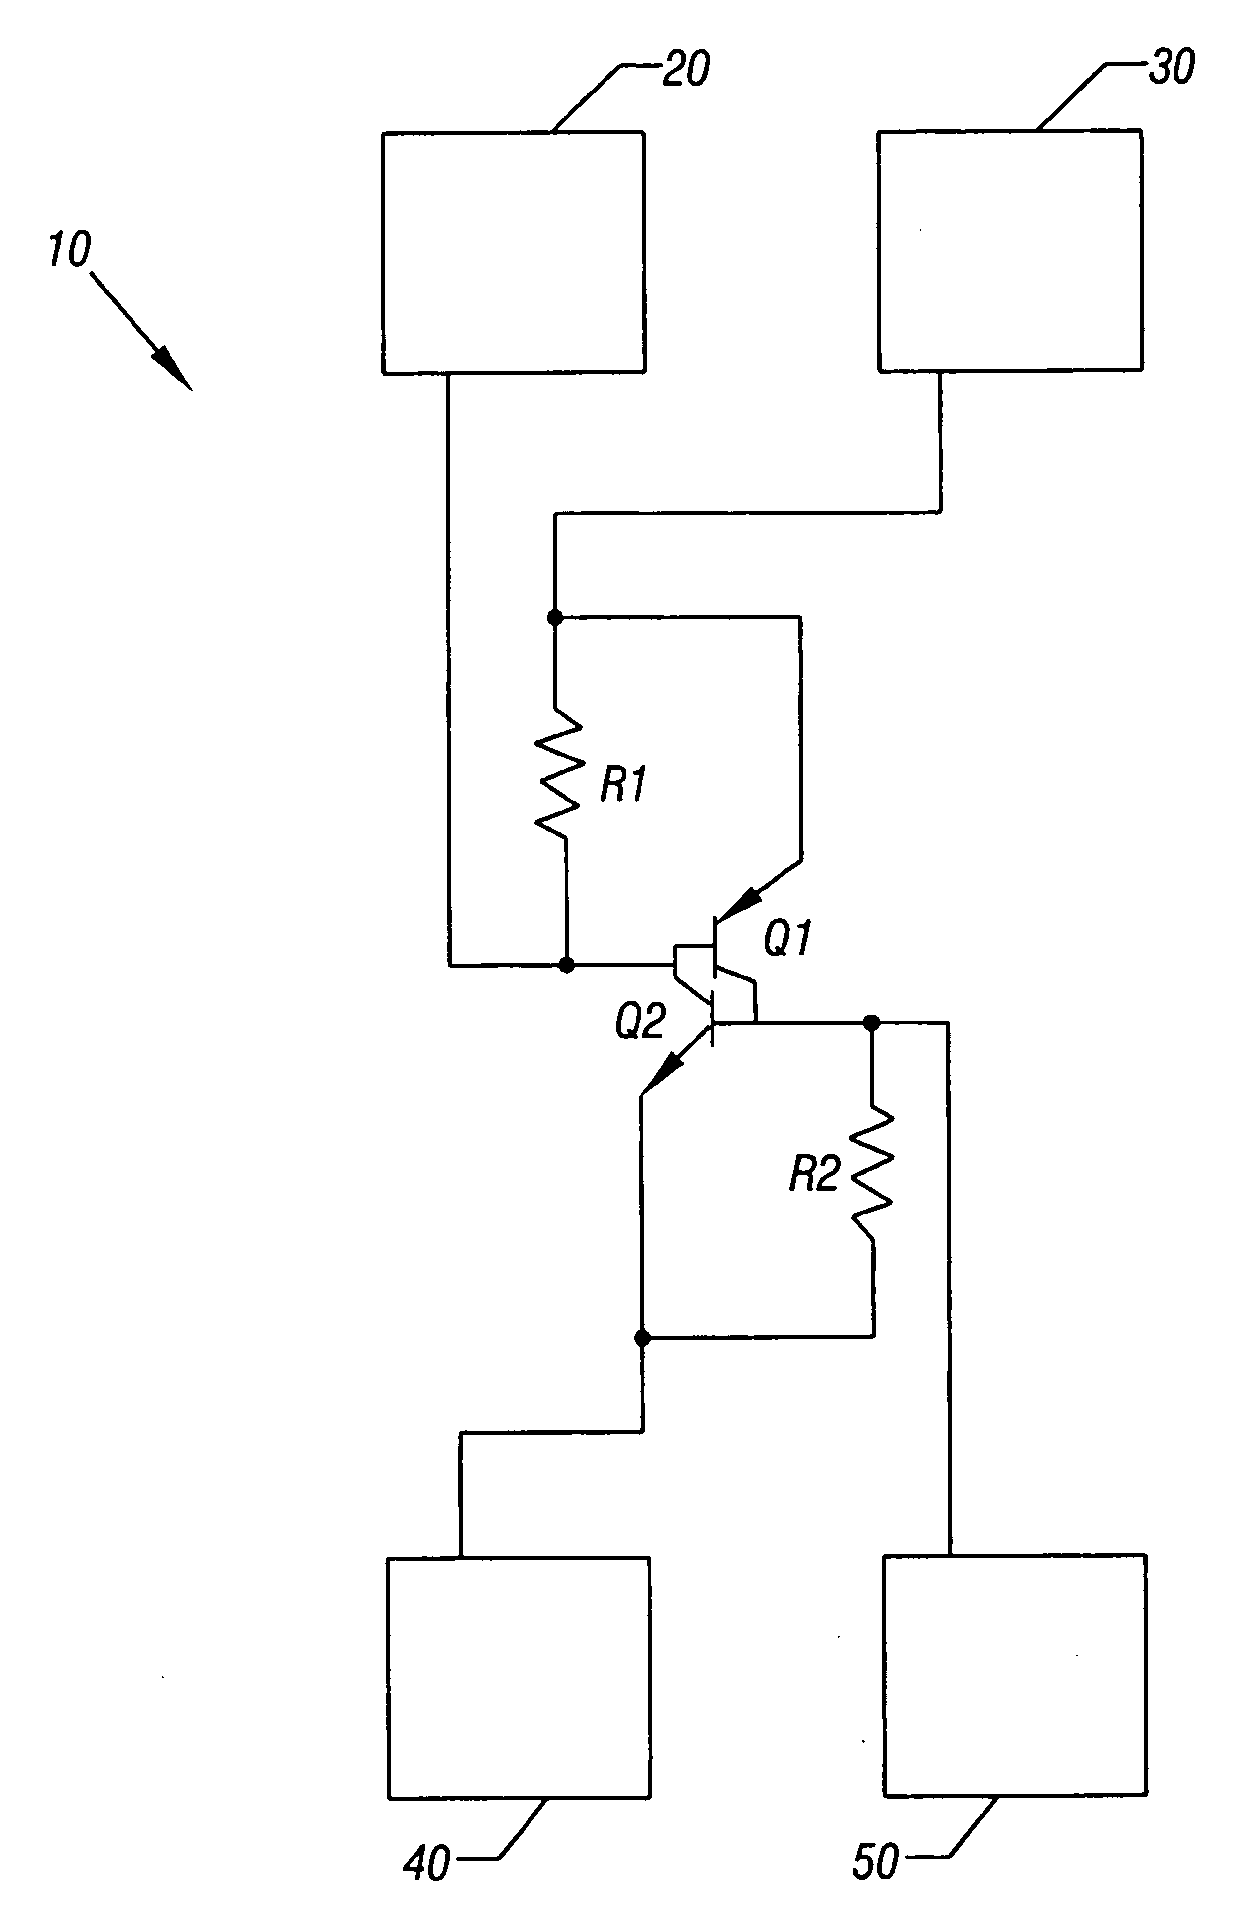 Silicon controlled rectifier protection circuit